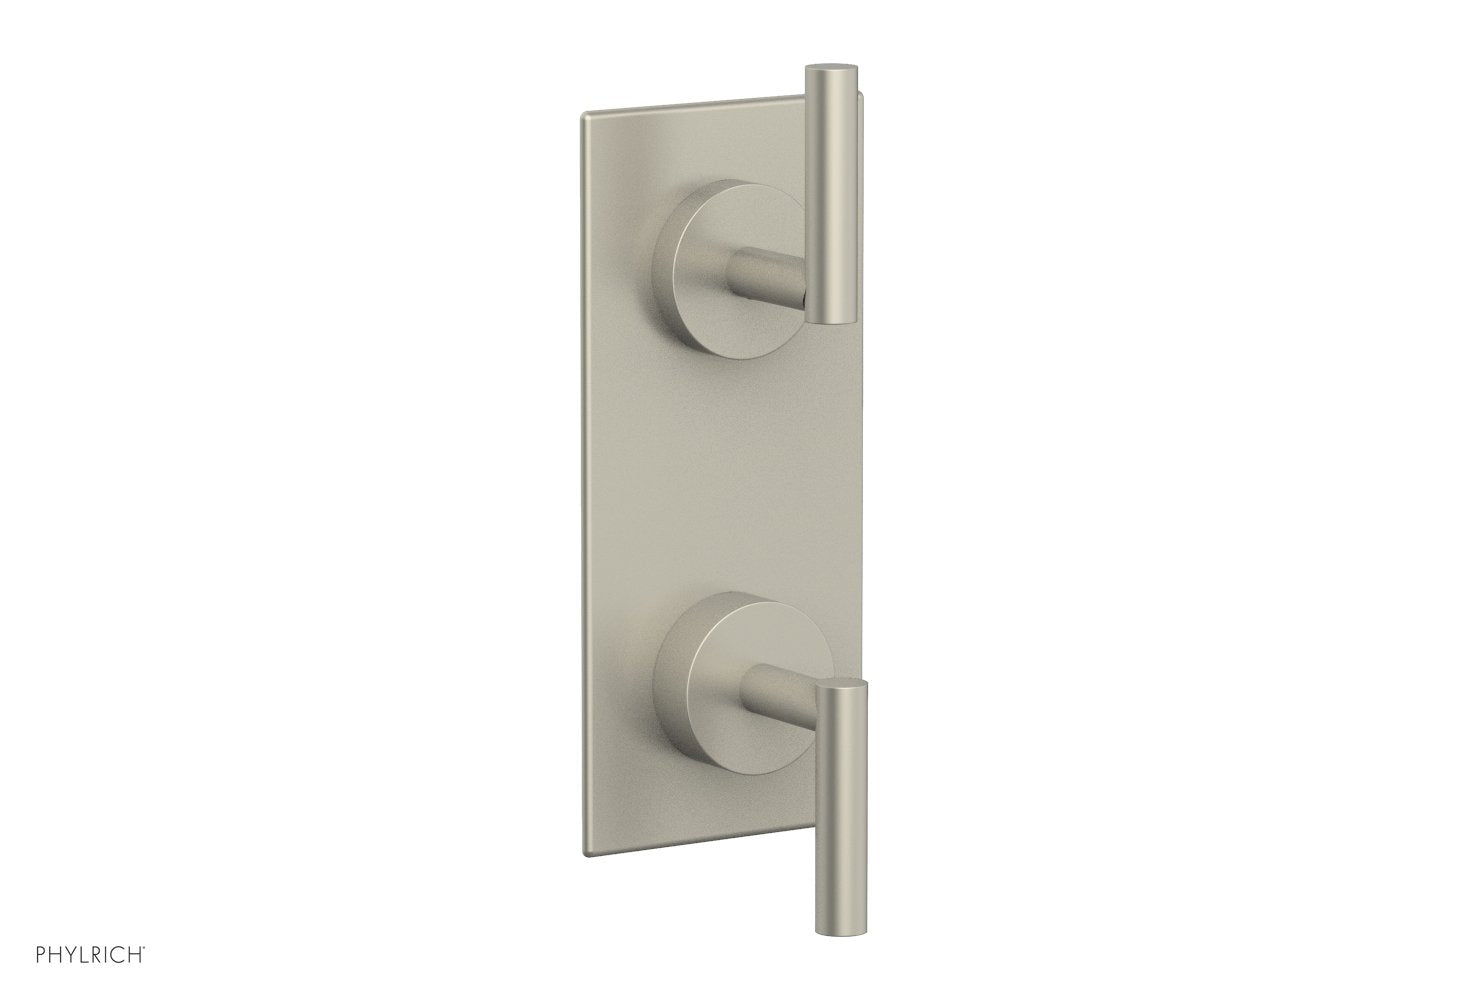 Phylrich TRANSITION 3/4" Thermostatic Valve with Volume Control or Diverter, Lever Handles